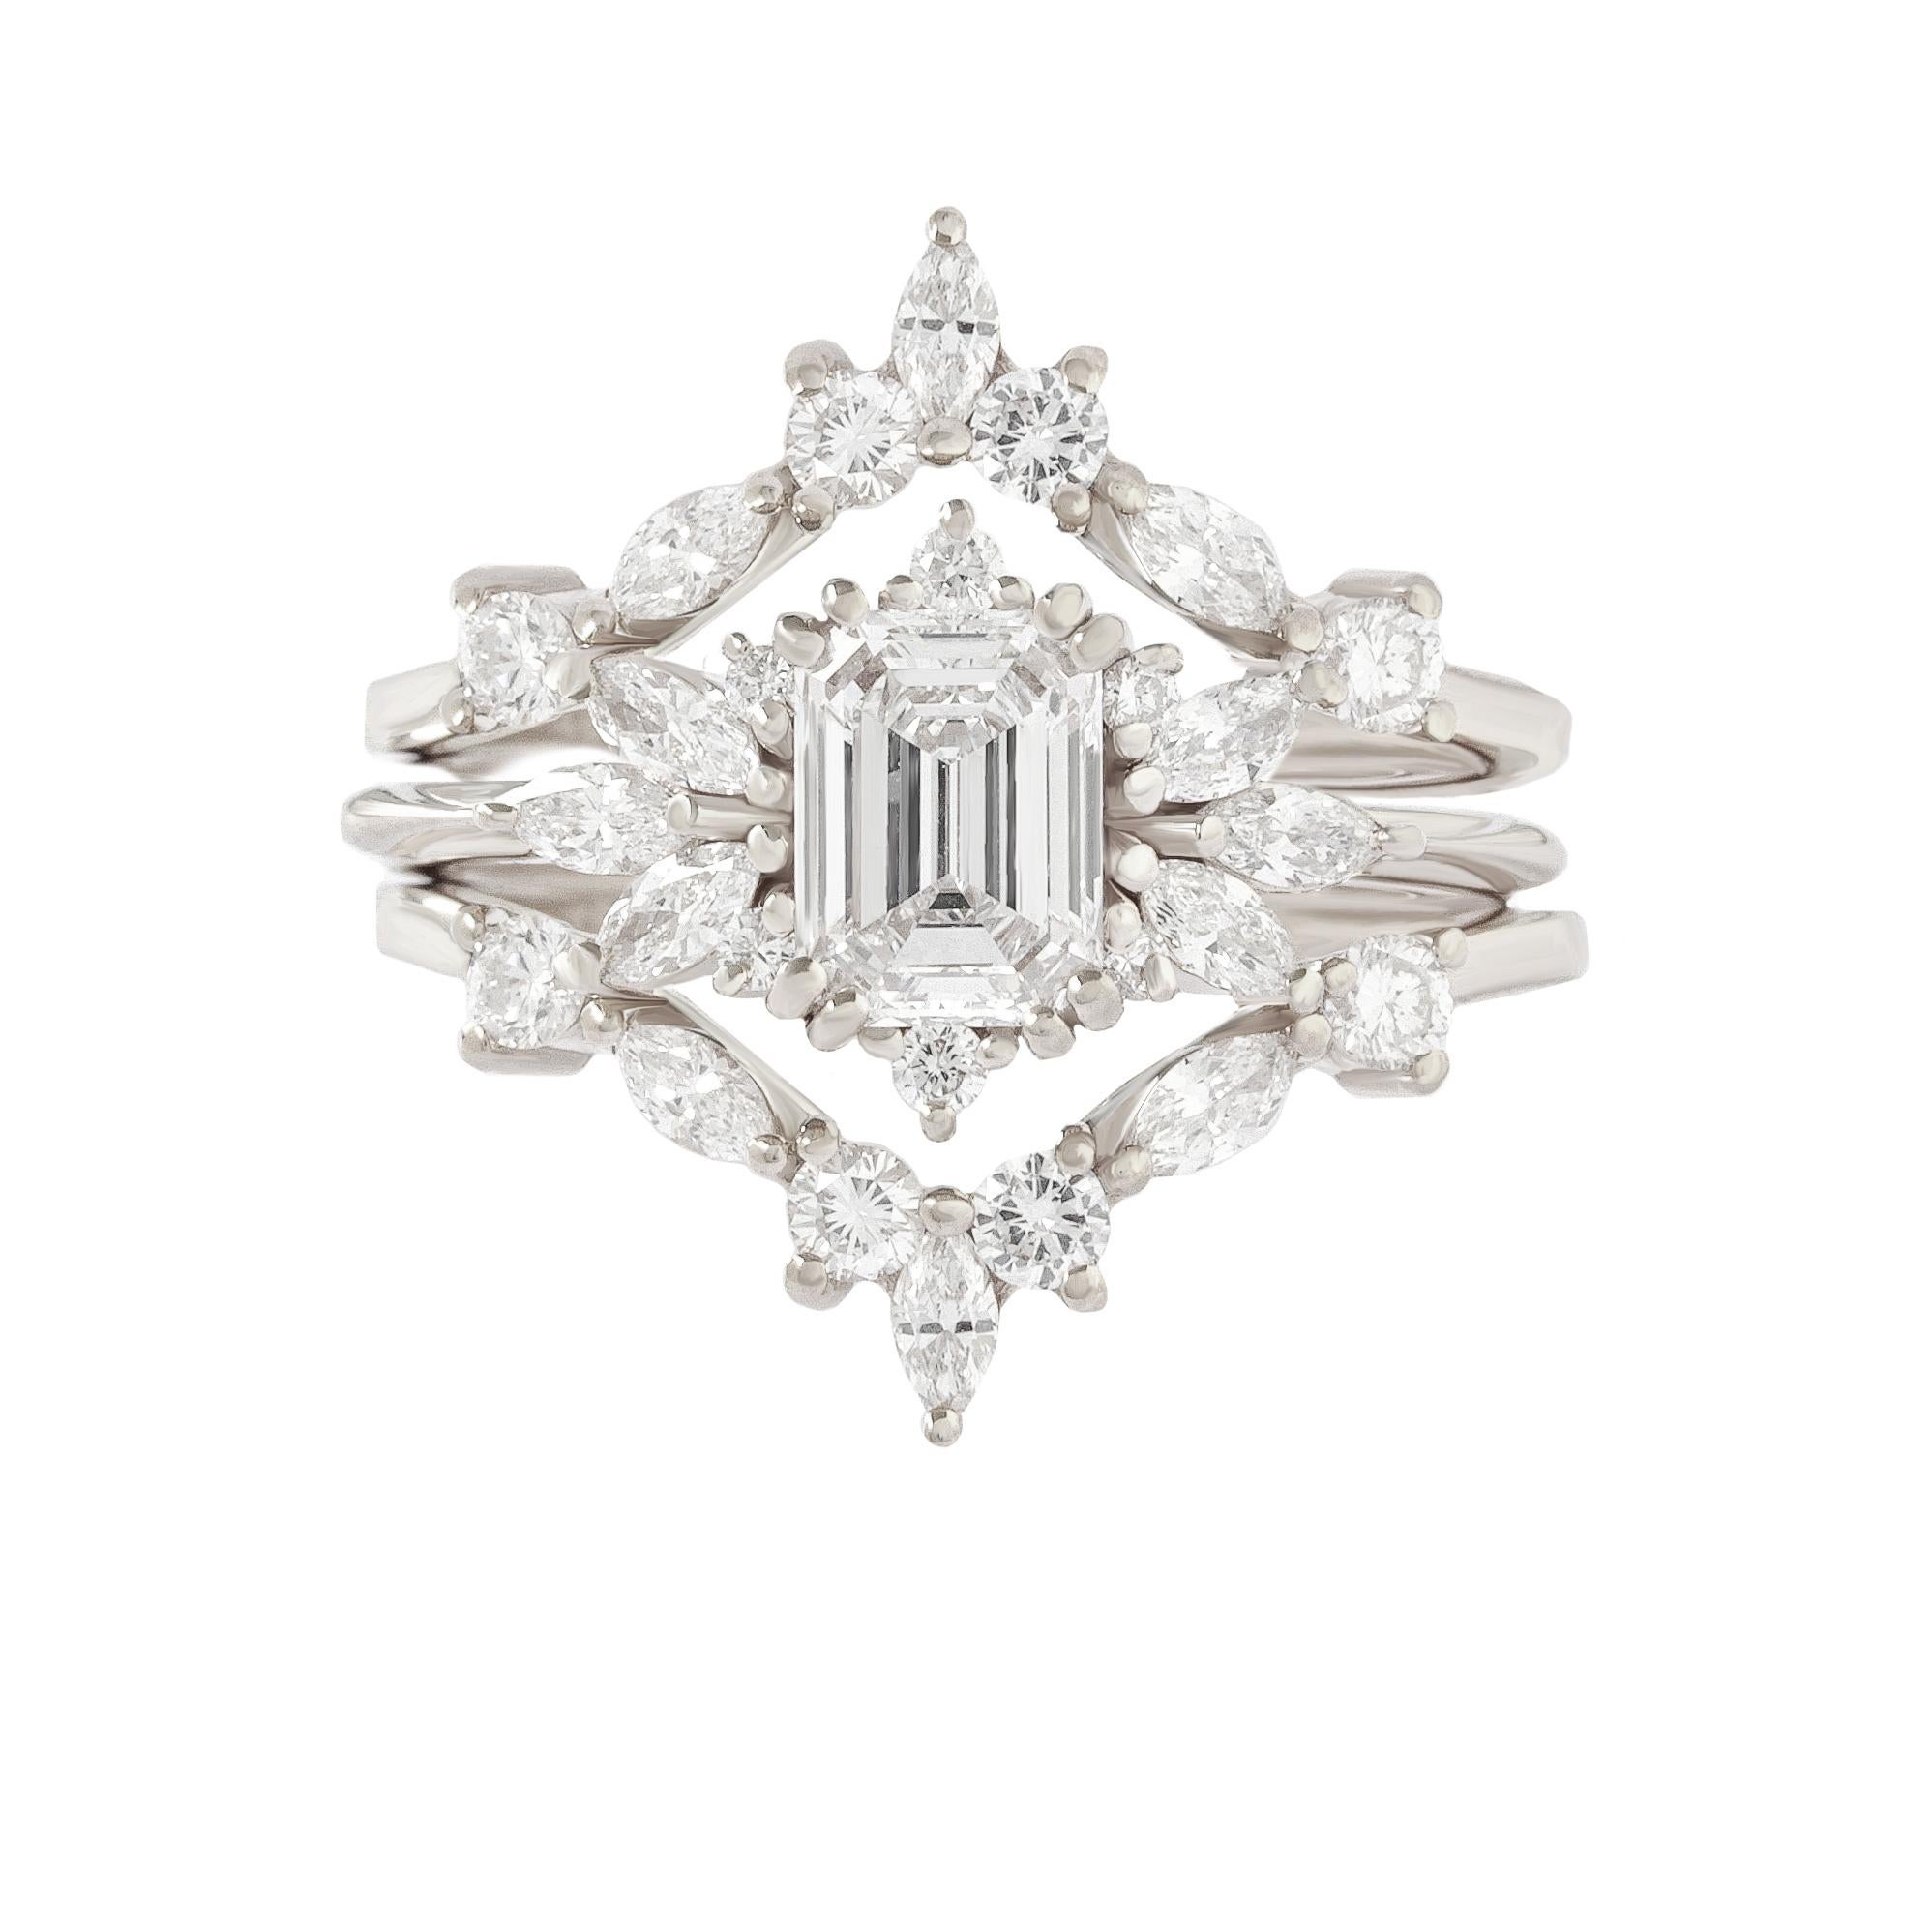 Make a bold statement with this elegant Emerald Cut Diamond Engagement Ring Set. The 